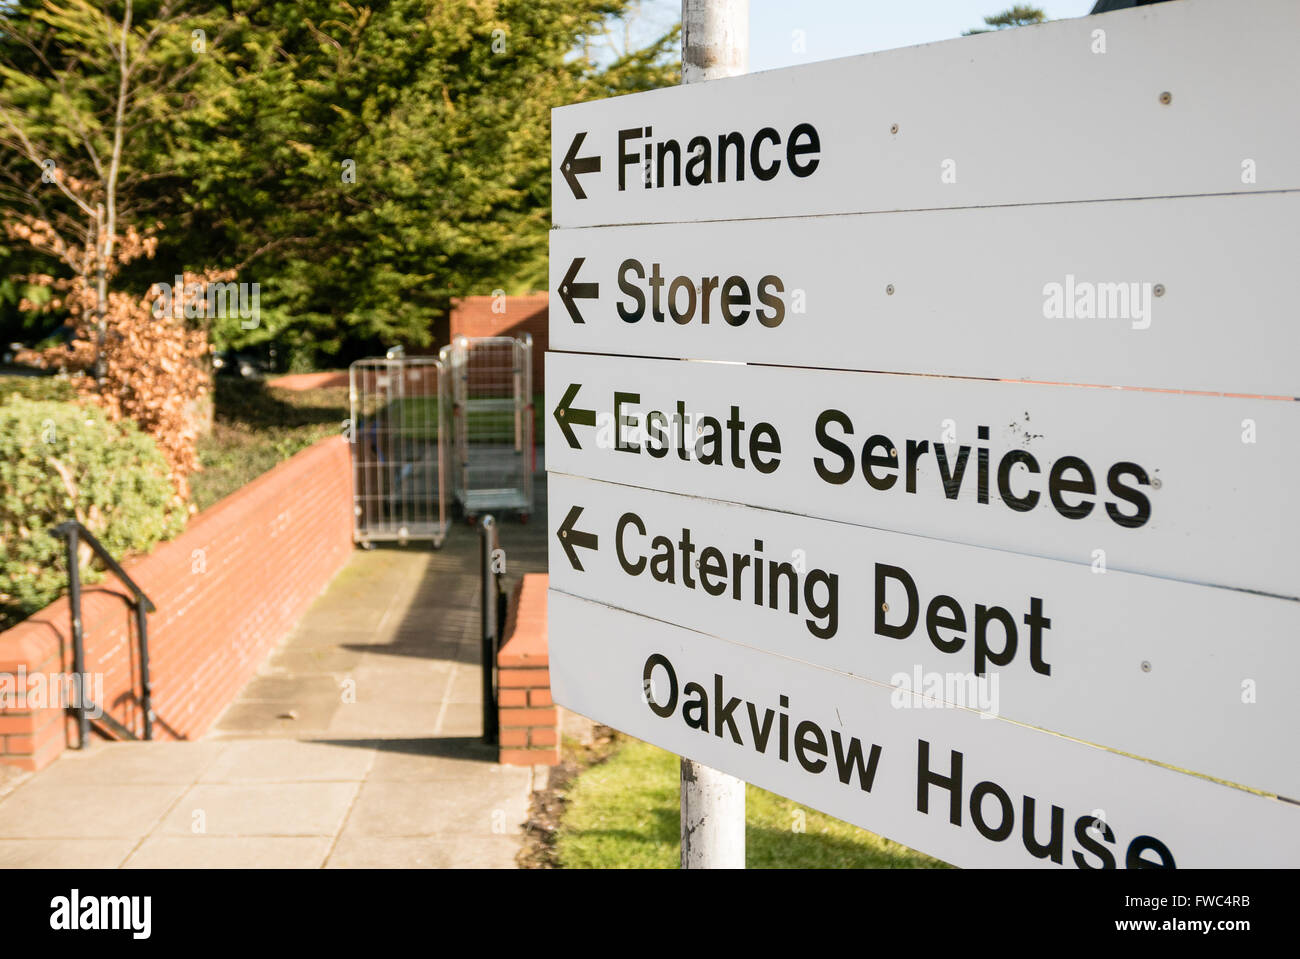 Sign at a hospital giving directions to various administration and service units Finance, Stores, Estate Services, Catering Depa Stock Photo